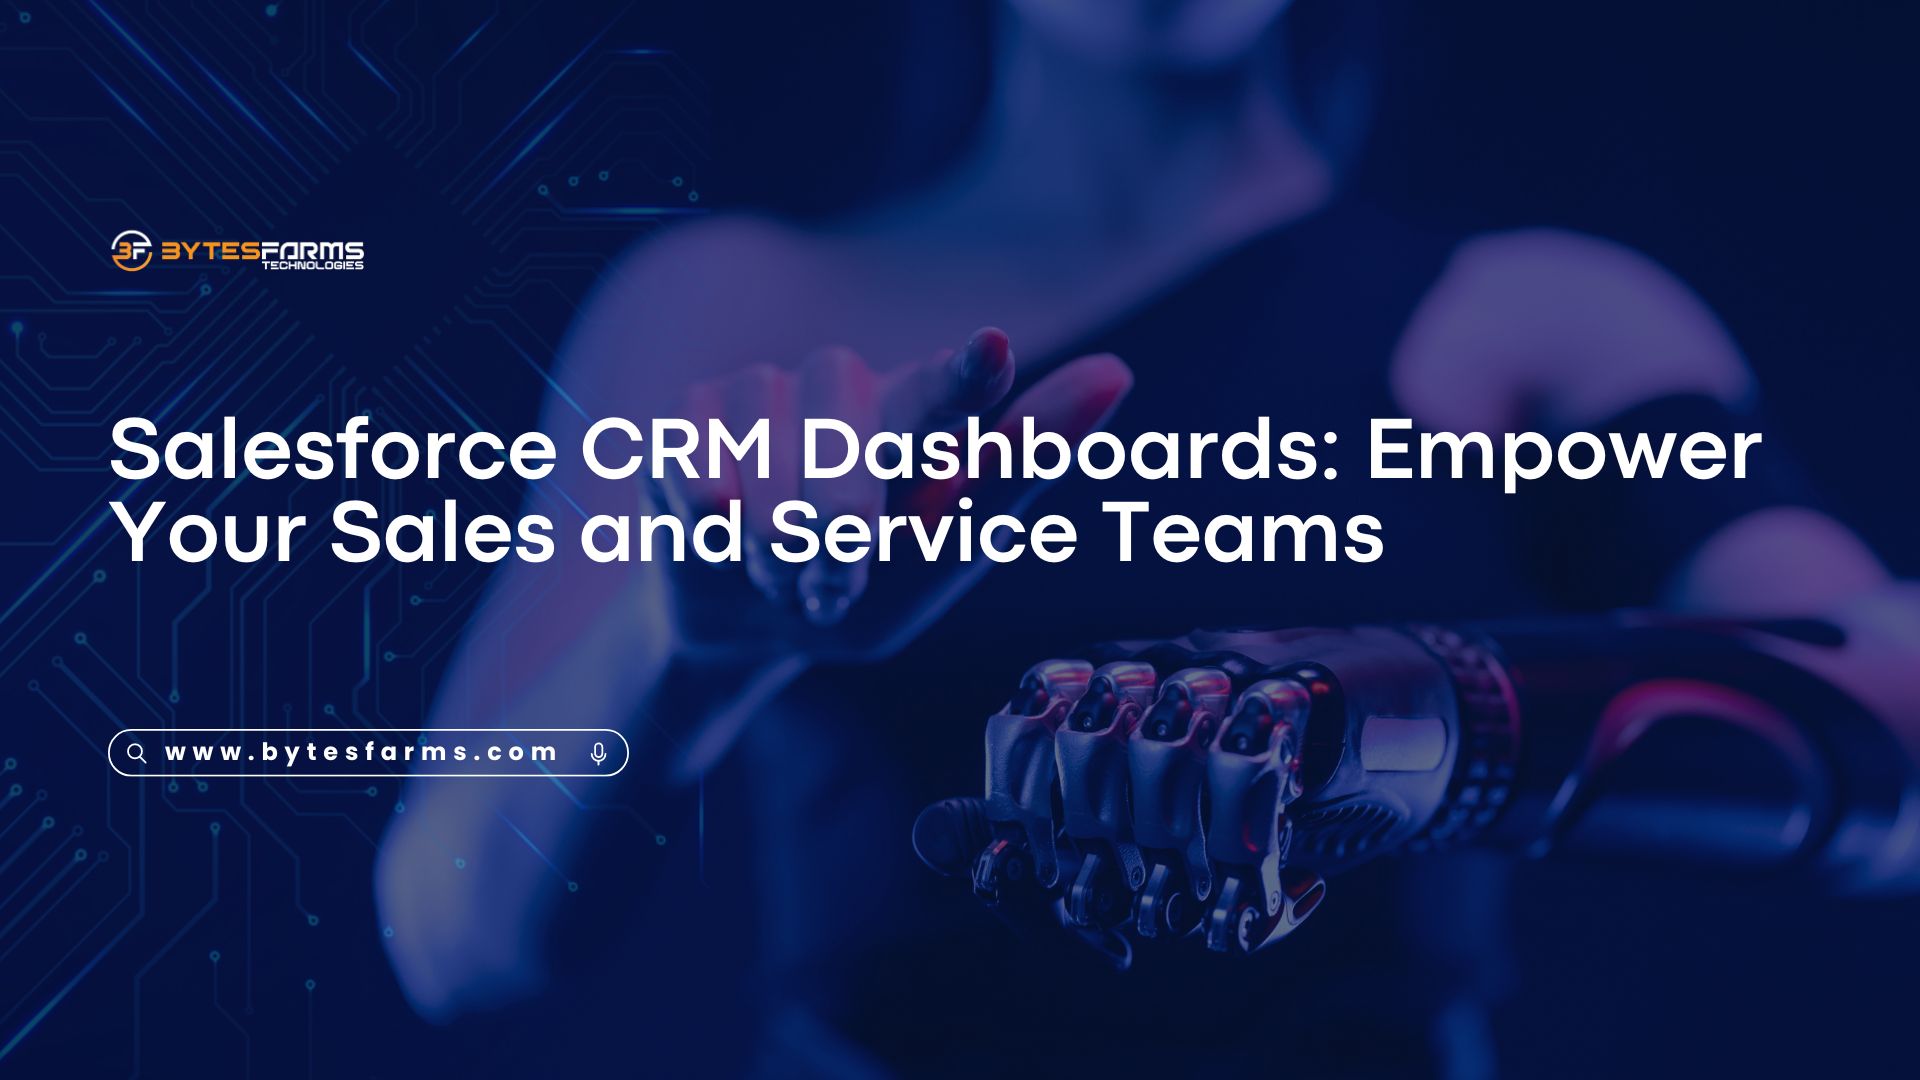 Salesforce CRM Dashboards: Empower Your Sales and Service Teams